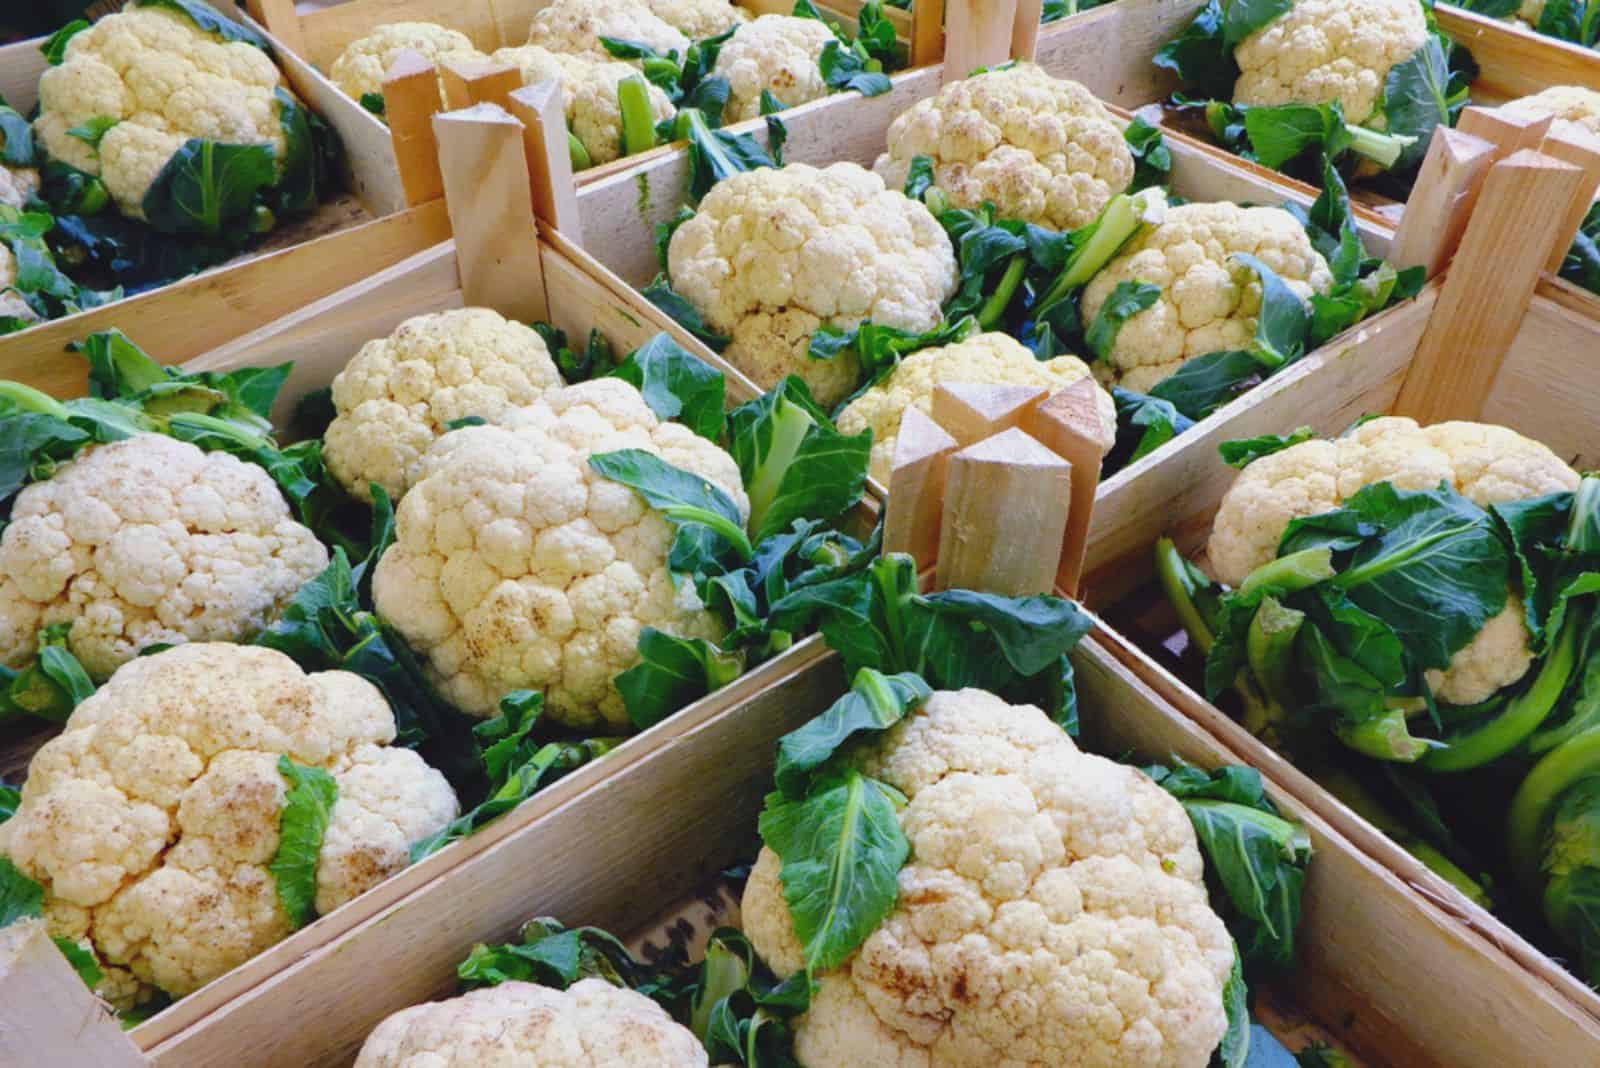 Cauliflowers in wooden boxes